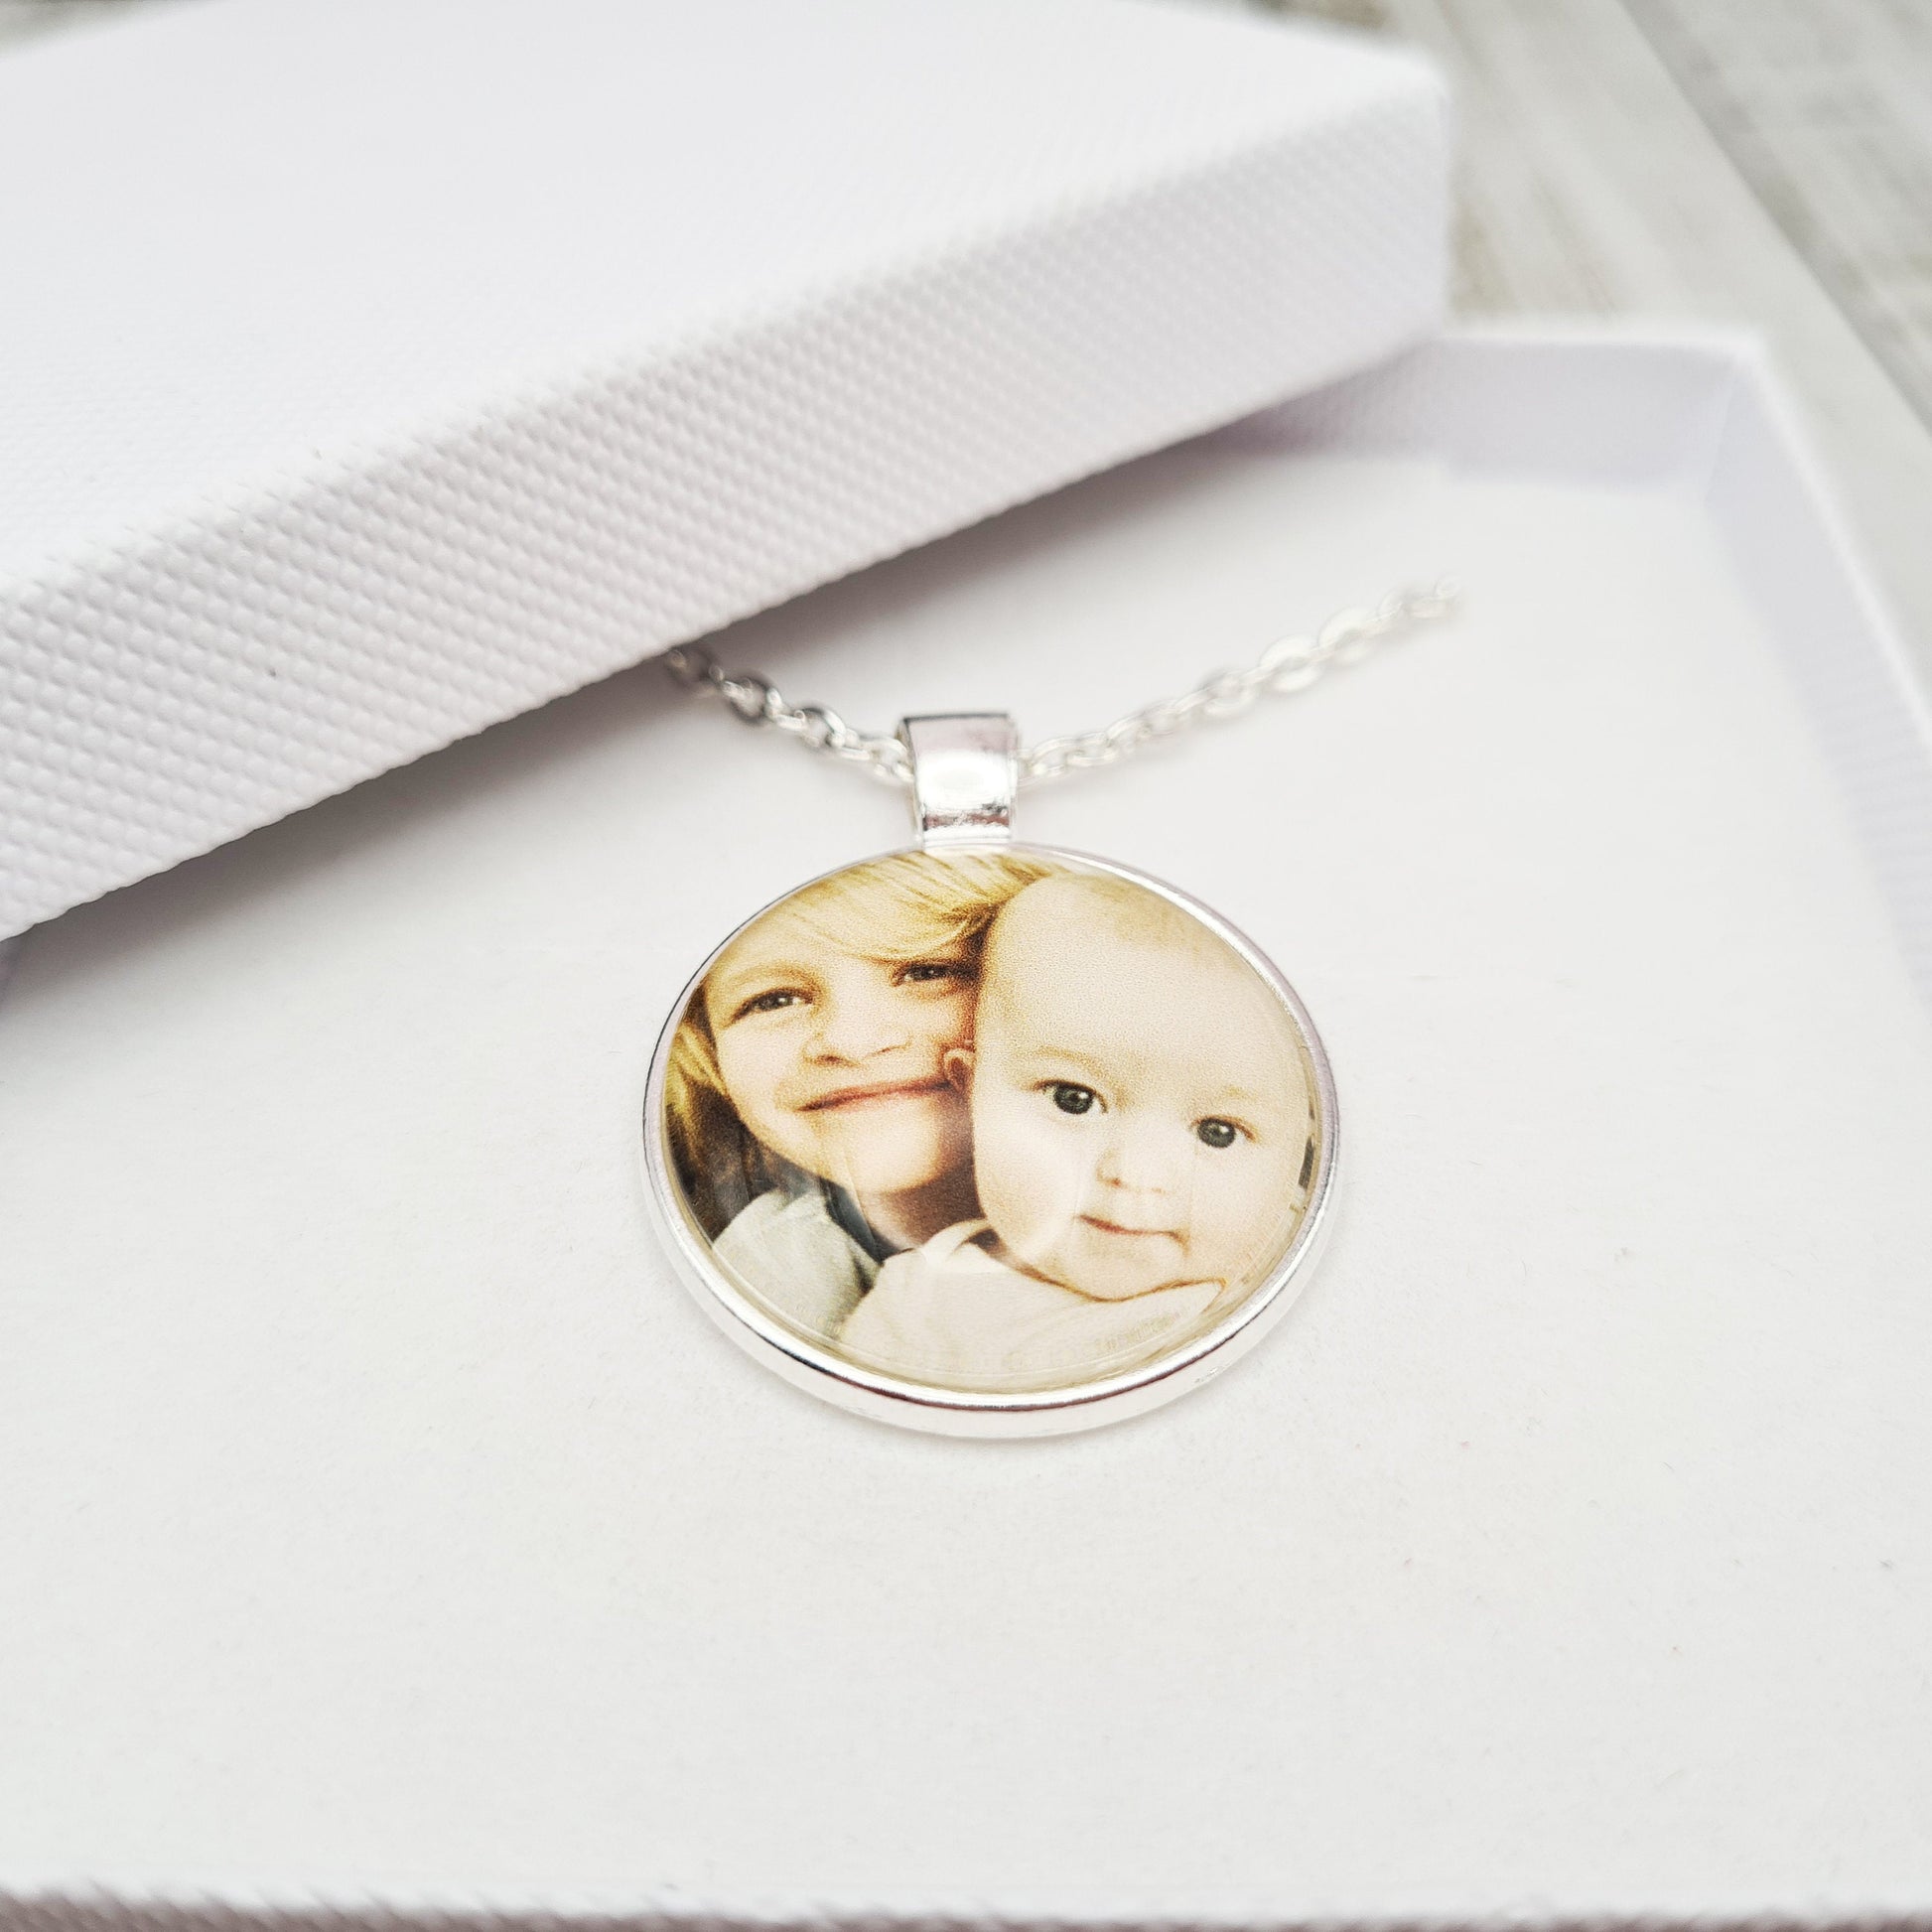 Silver necklace and pendant with personalised photo set in glass inside a white gift box